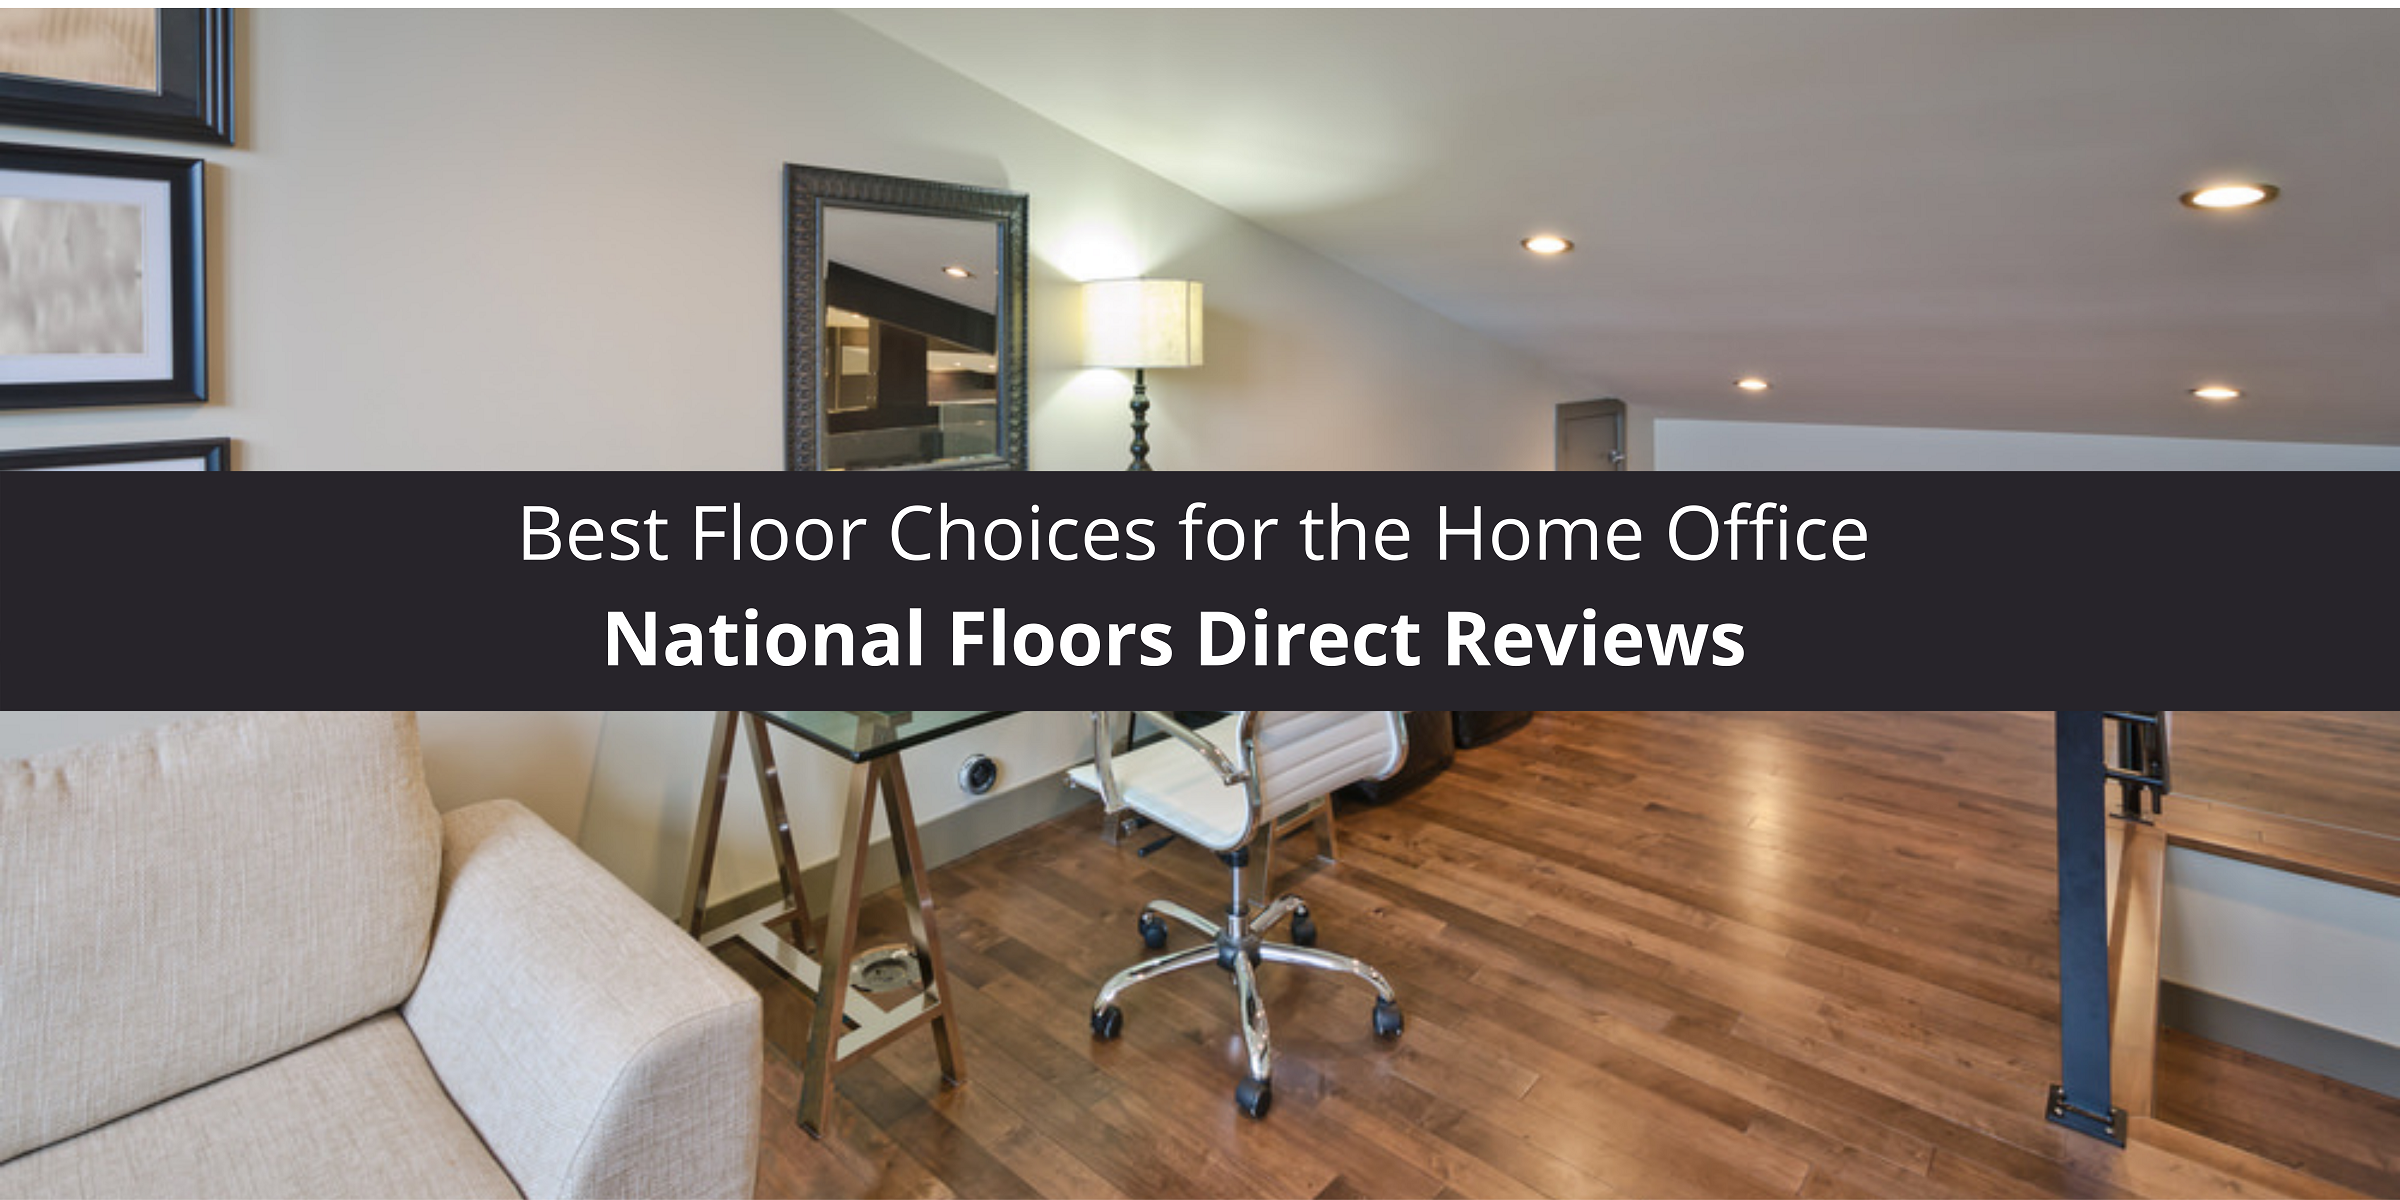 National Floors Direct Reviews Best Floor Choices for the Home Office